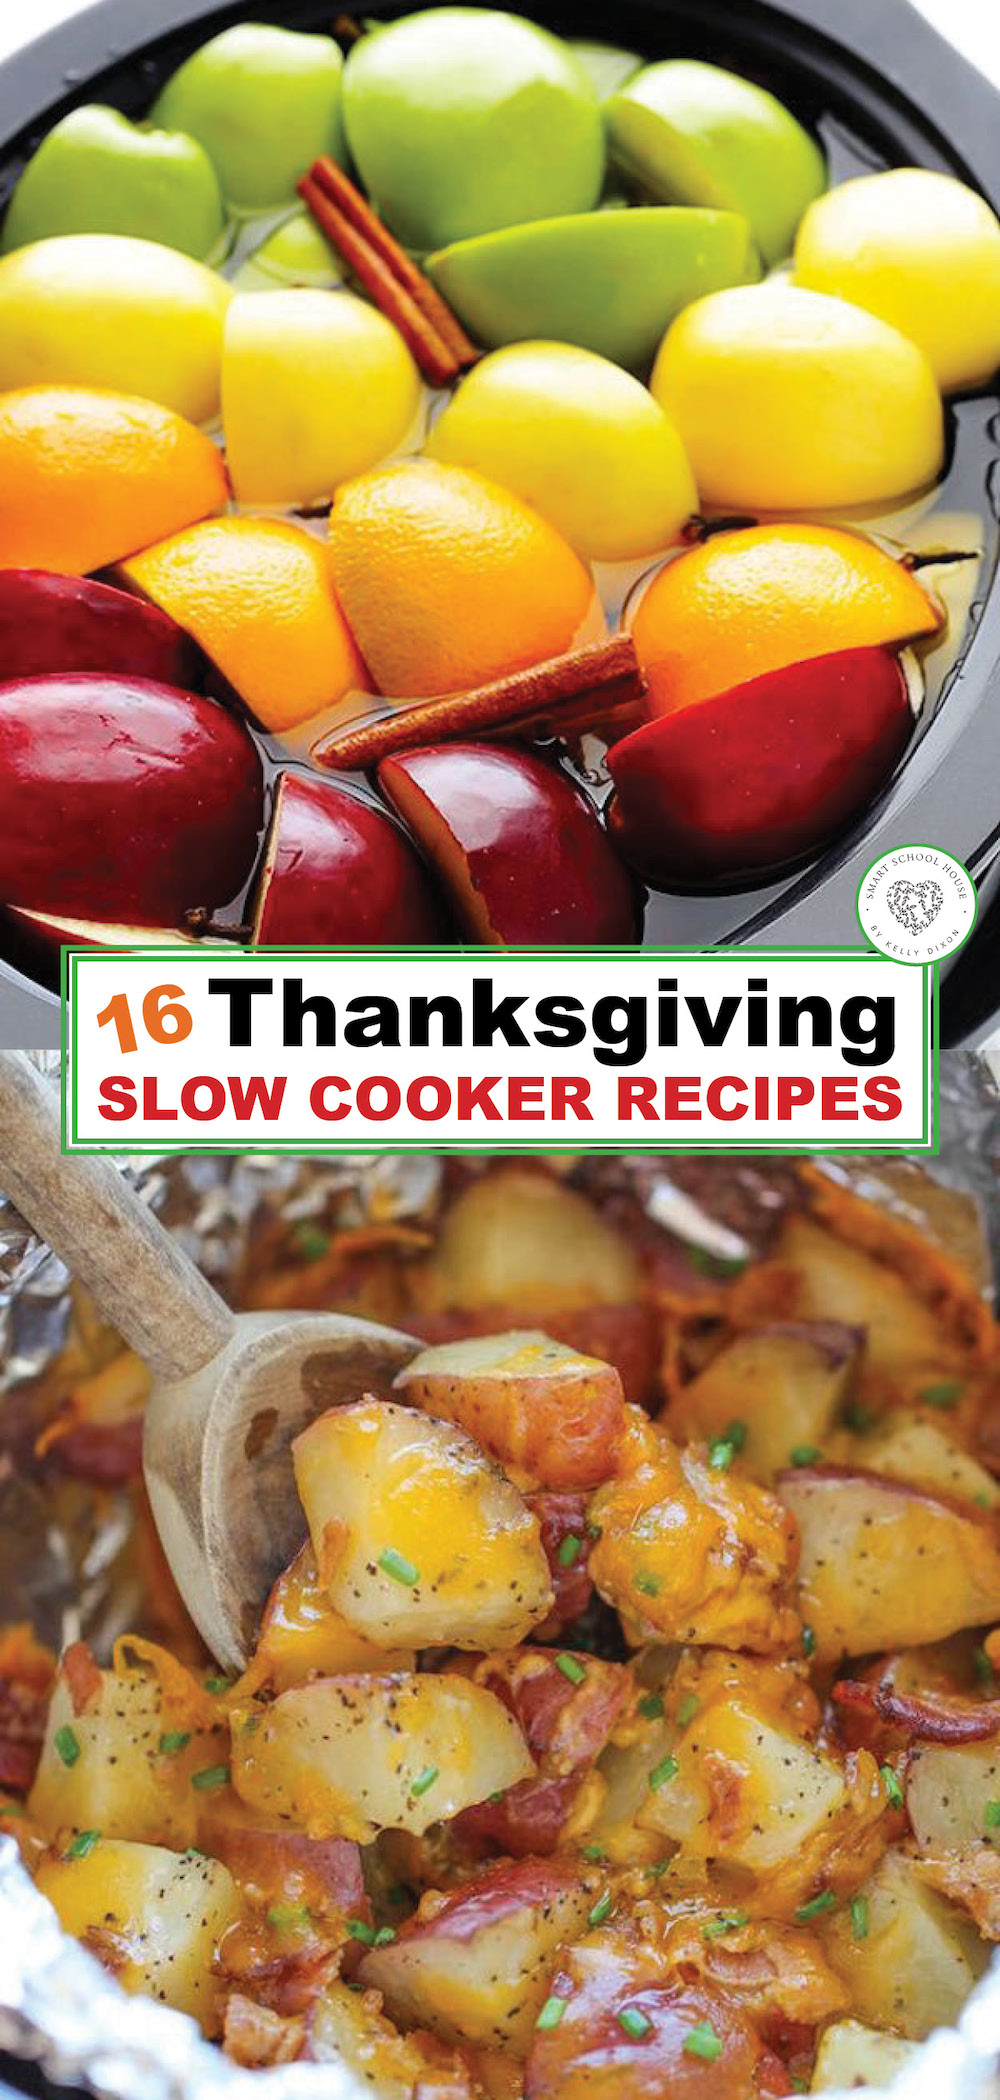 Thanksgiving Slow Cooker Hacks - take it easy this holiday with these crock pot Thanksgiving recipes that will save your life in the kitchen!